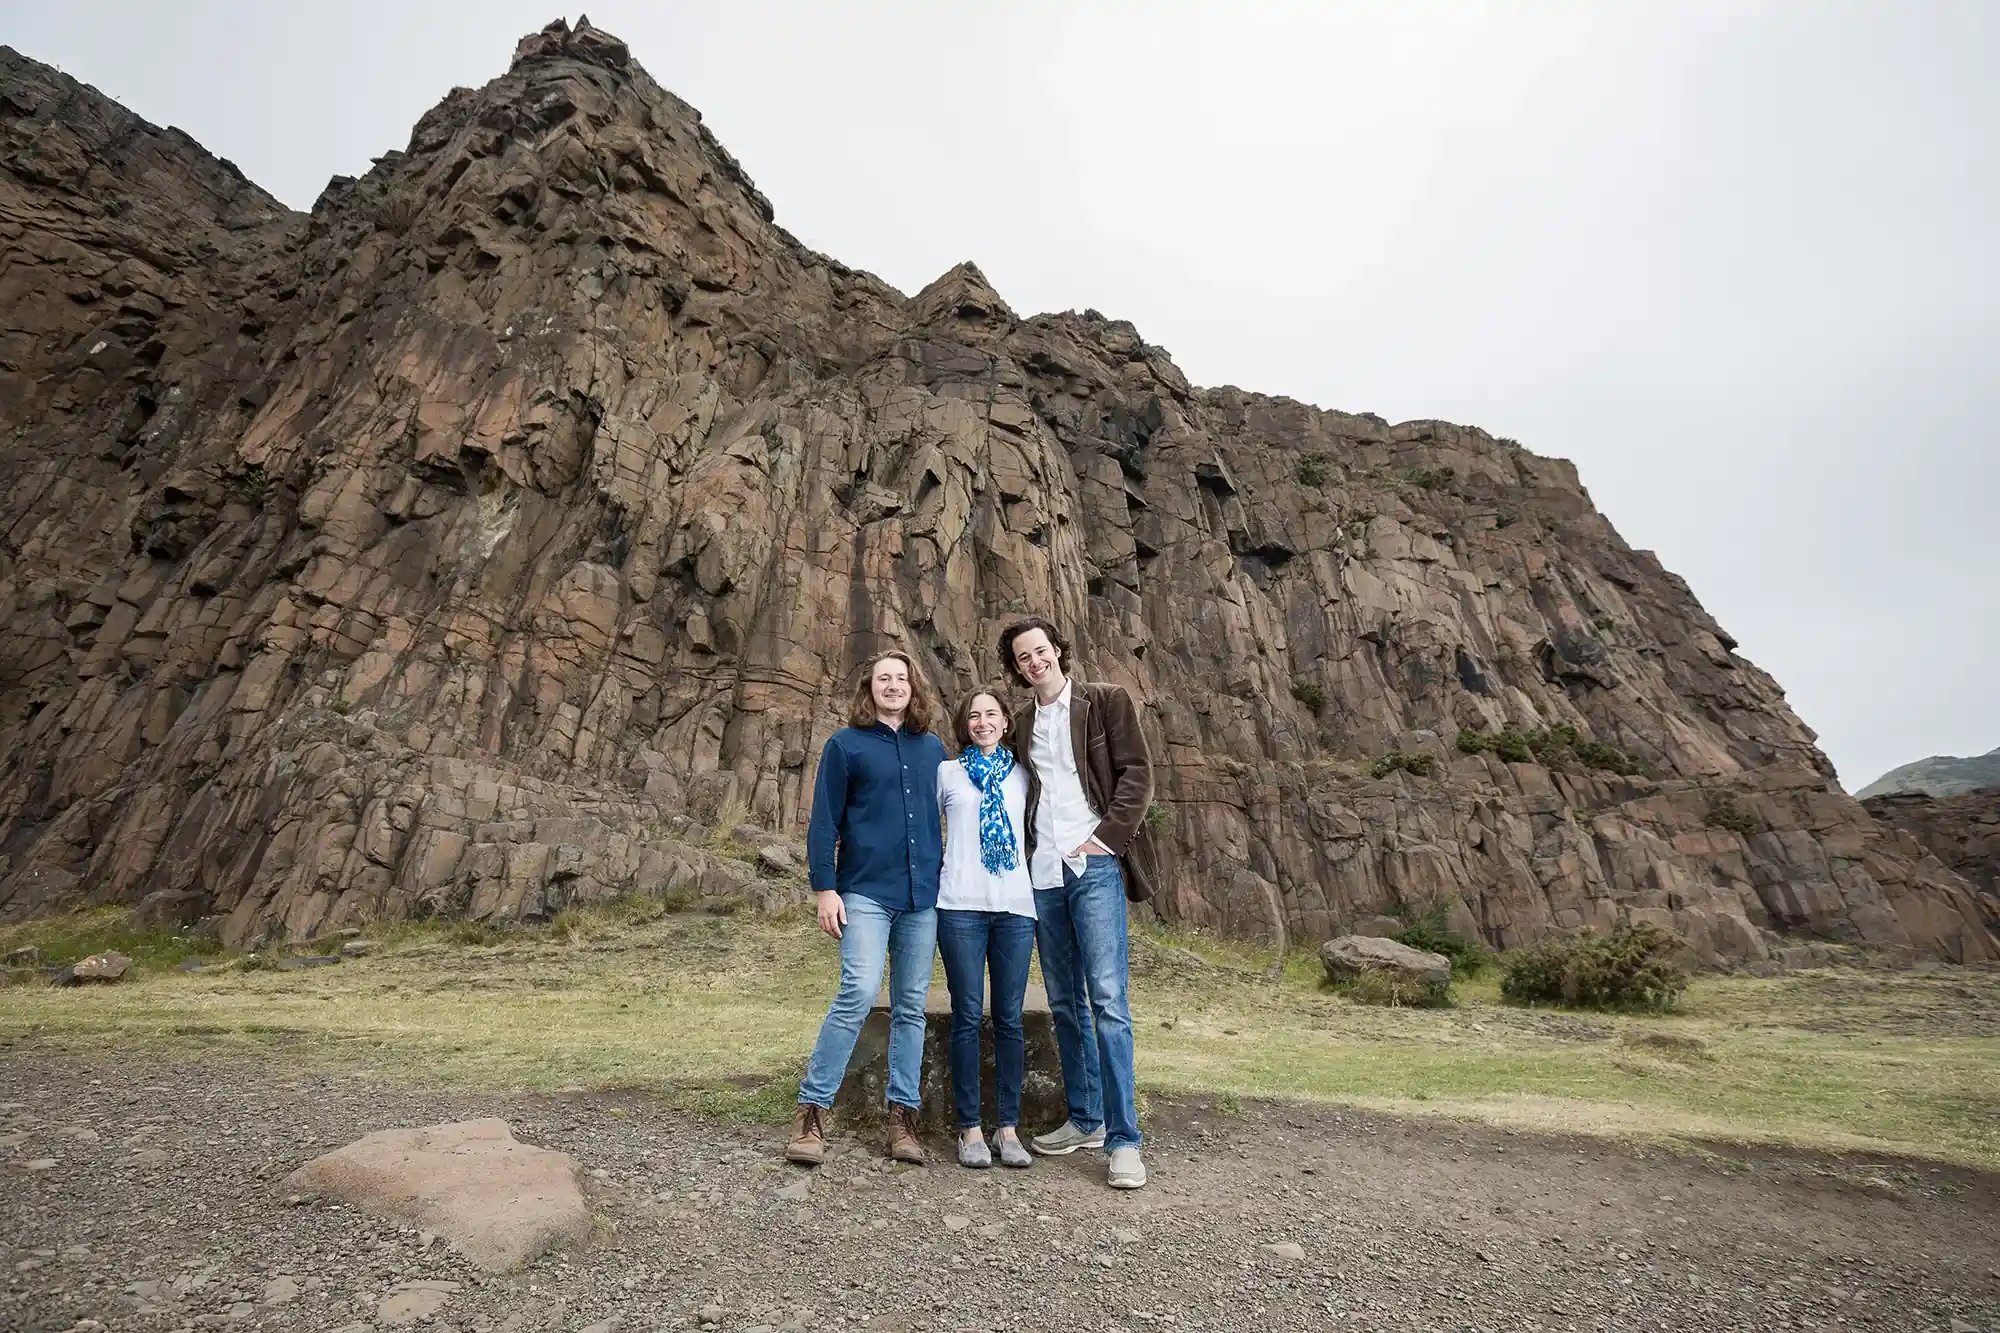 Three people standing together in front of a large rocky cliff face, with cloudy sky overhead. They are on a rocky and grassy terrain.